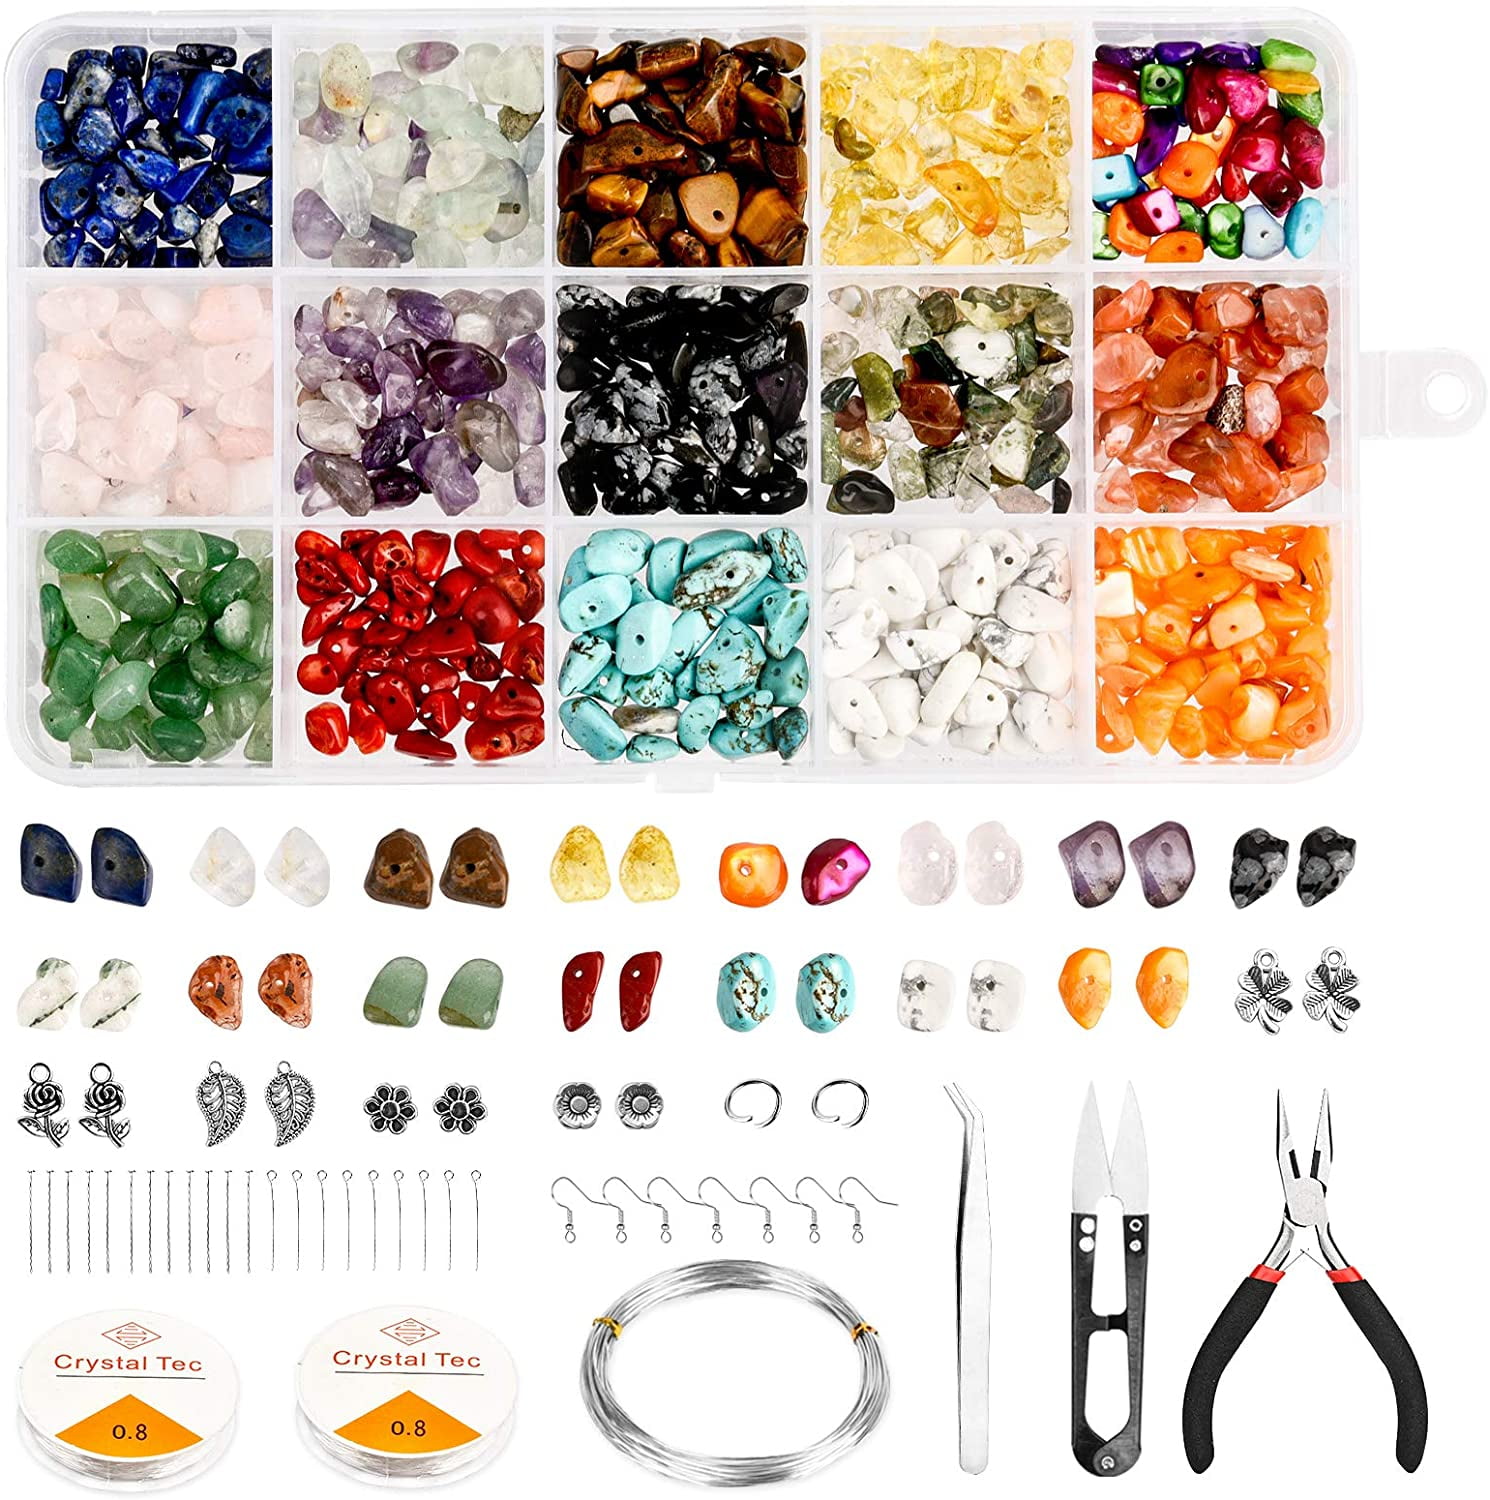 Bead Bracelet Making Kit with Mixed Color Animal Fruit Flower Letter Beads  for Jewelry Making Handmade DIY Bracelet Necklace 